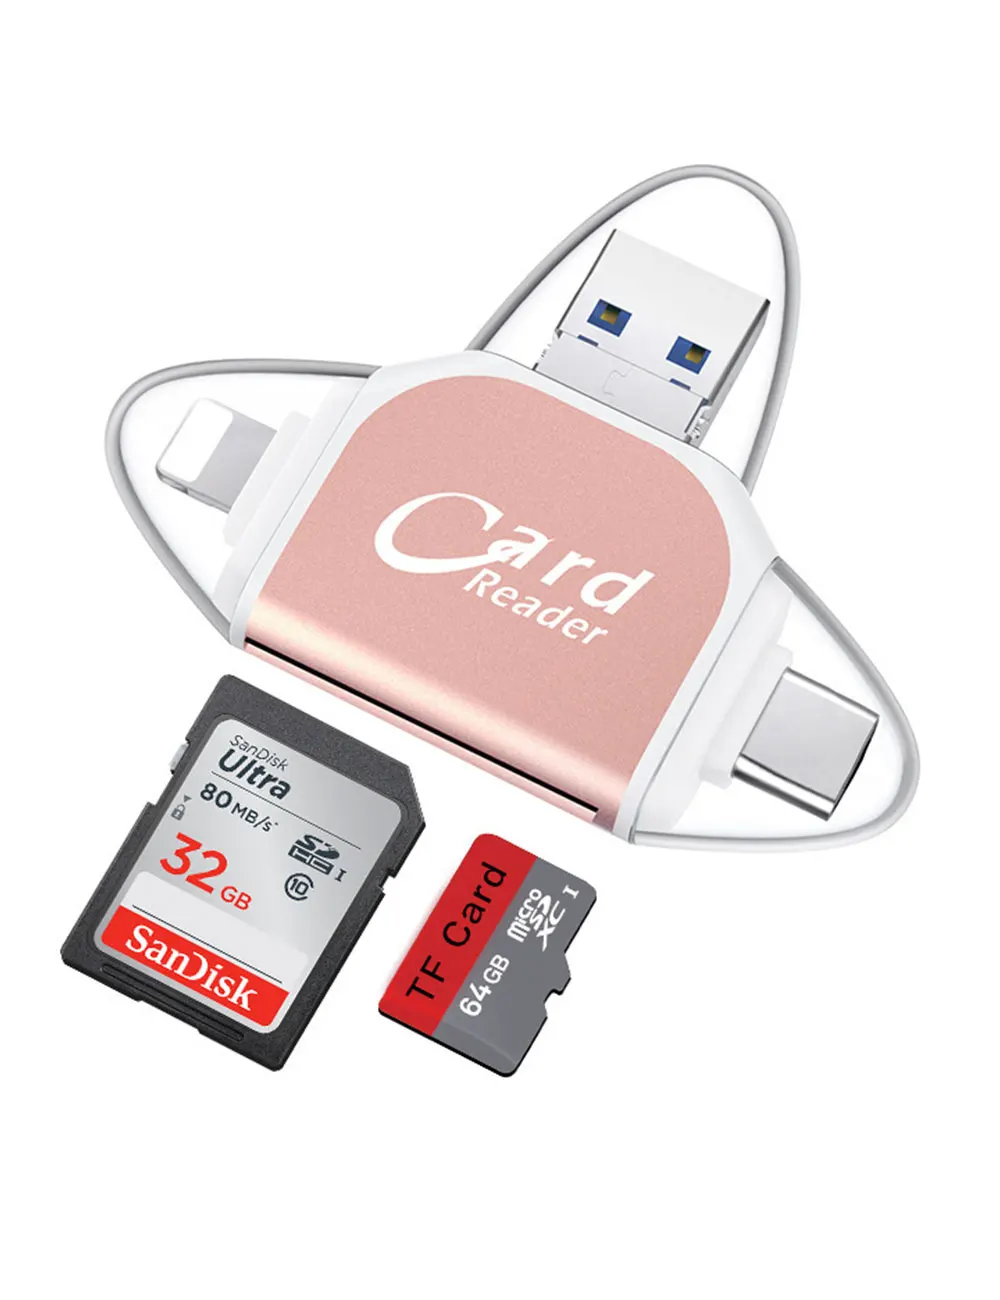 Real-EL SD Card Reader for iPhone 4 in 1 SD Card Adapter Micro SD Card  Reader for iPad Trail Camera Viewer Portable Memory Card Reader Plug and  Play